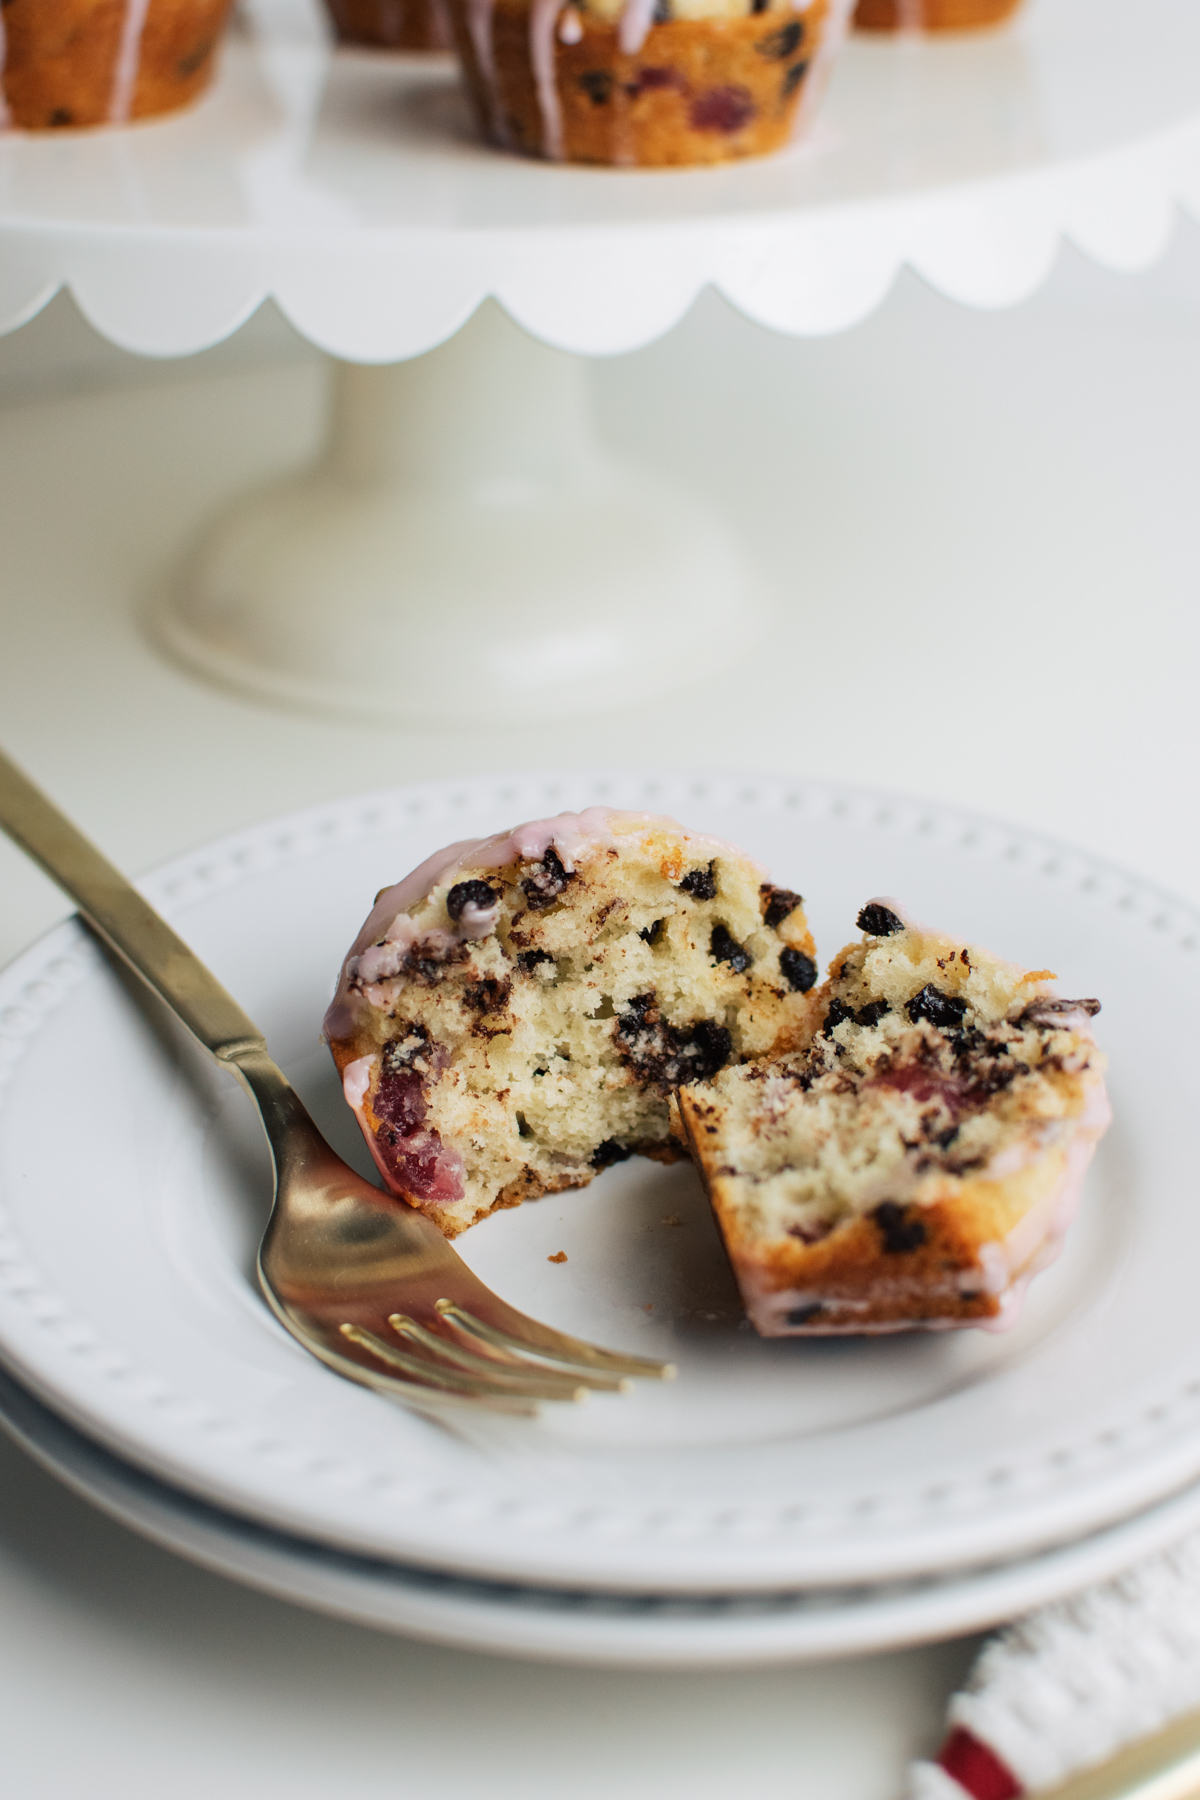 Easy chocolate chip muffins with cherries on stack of white dinner plates.